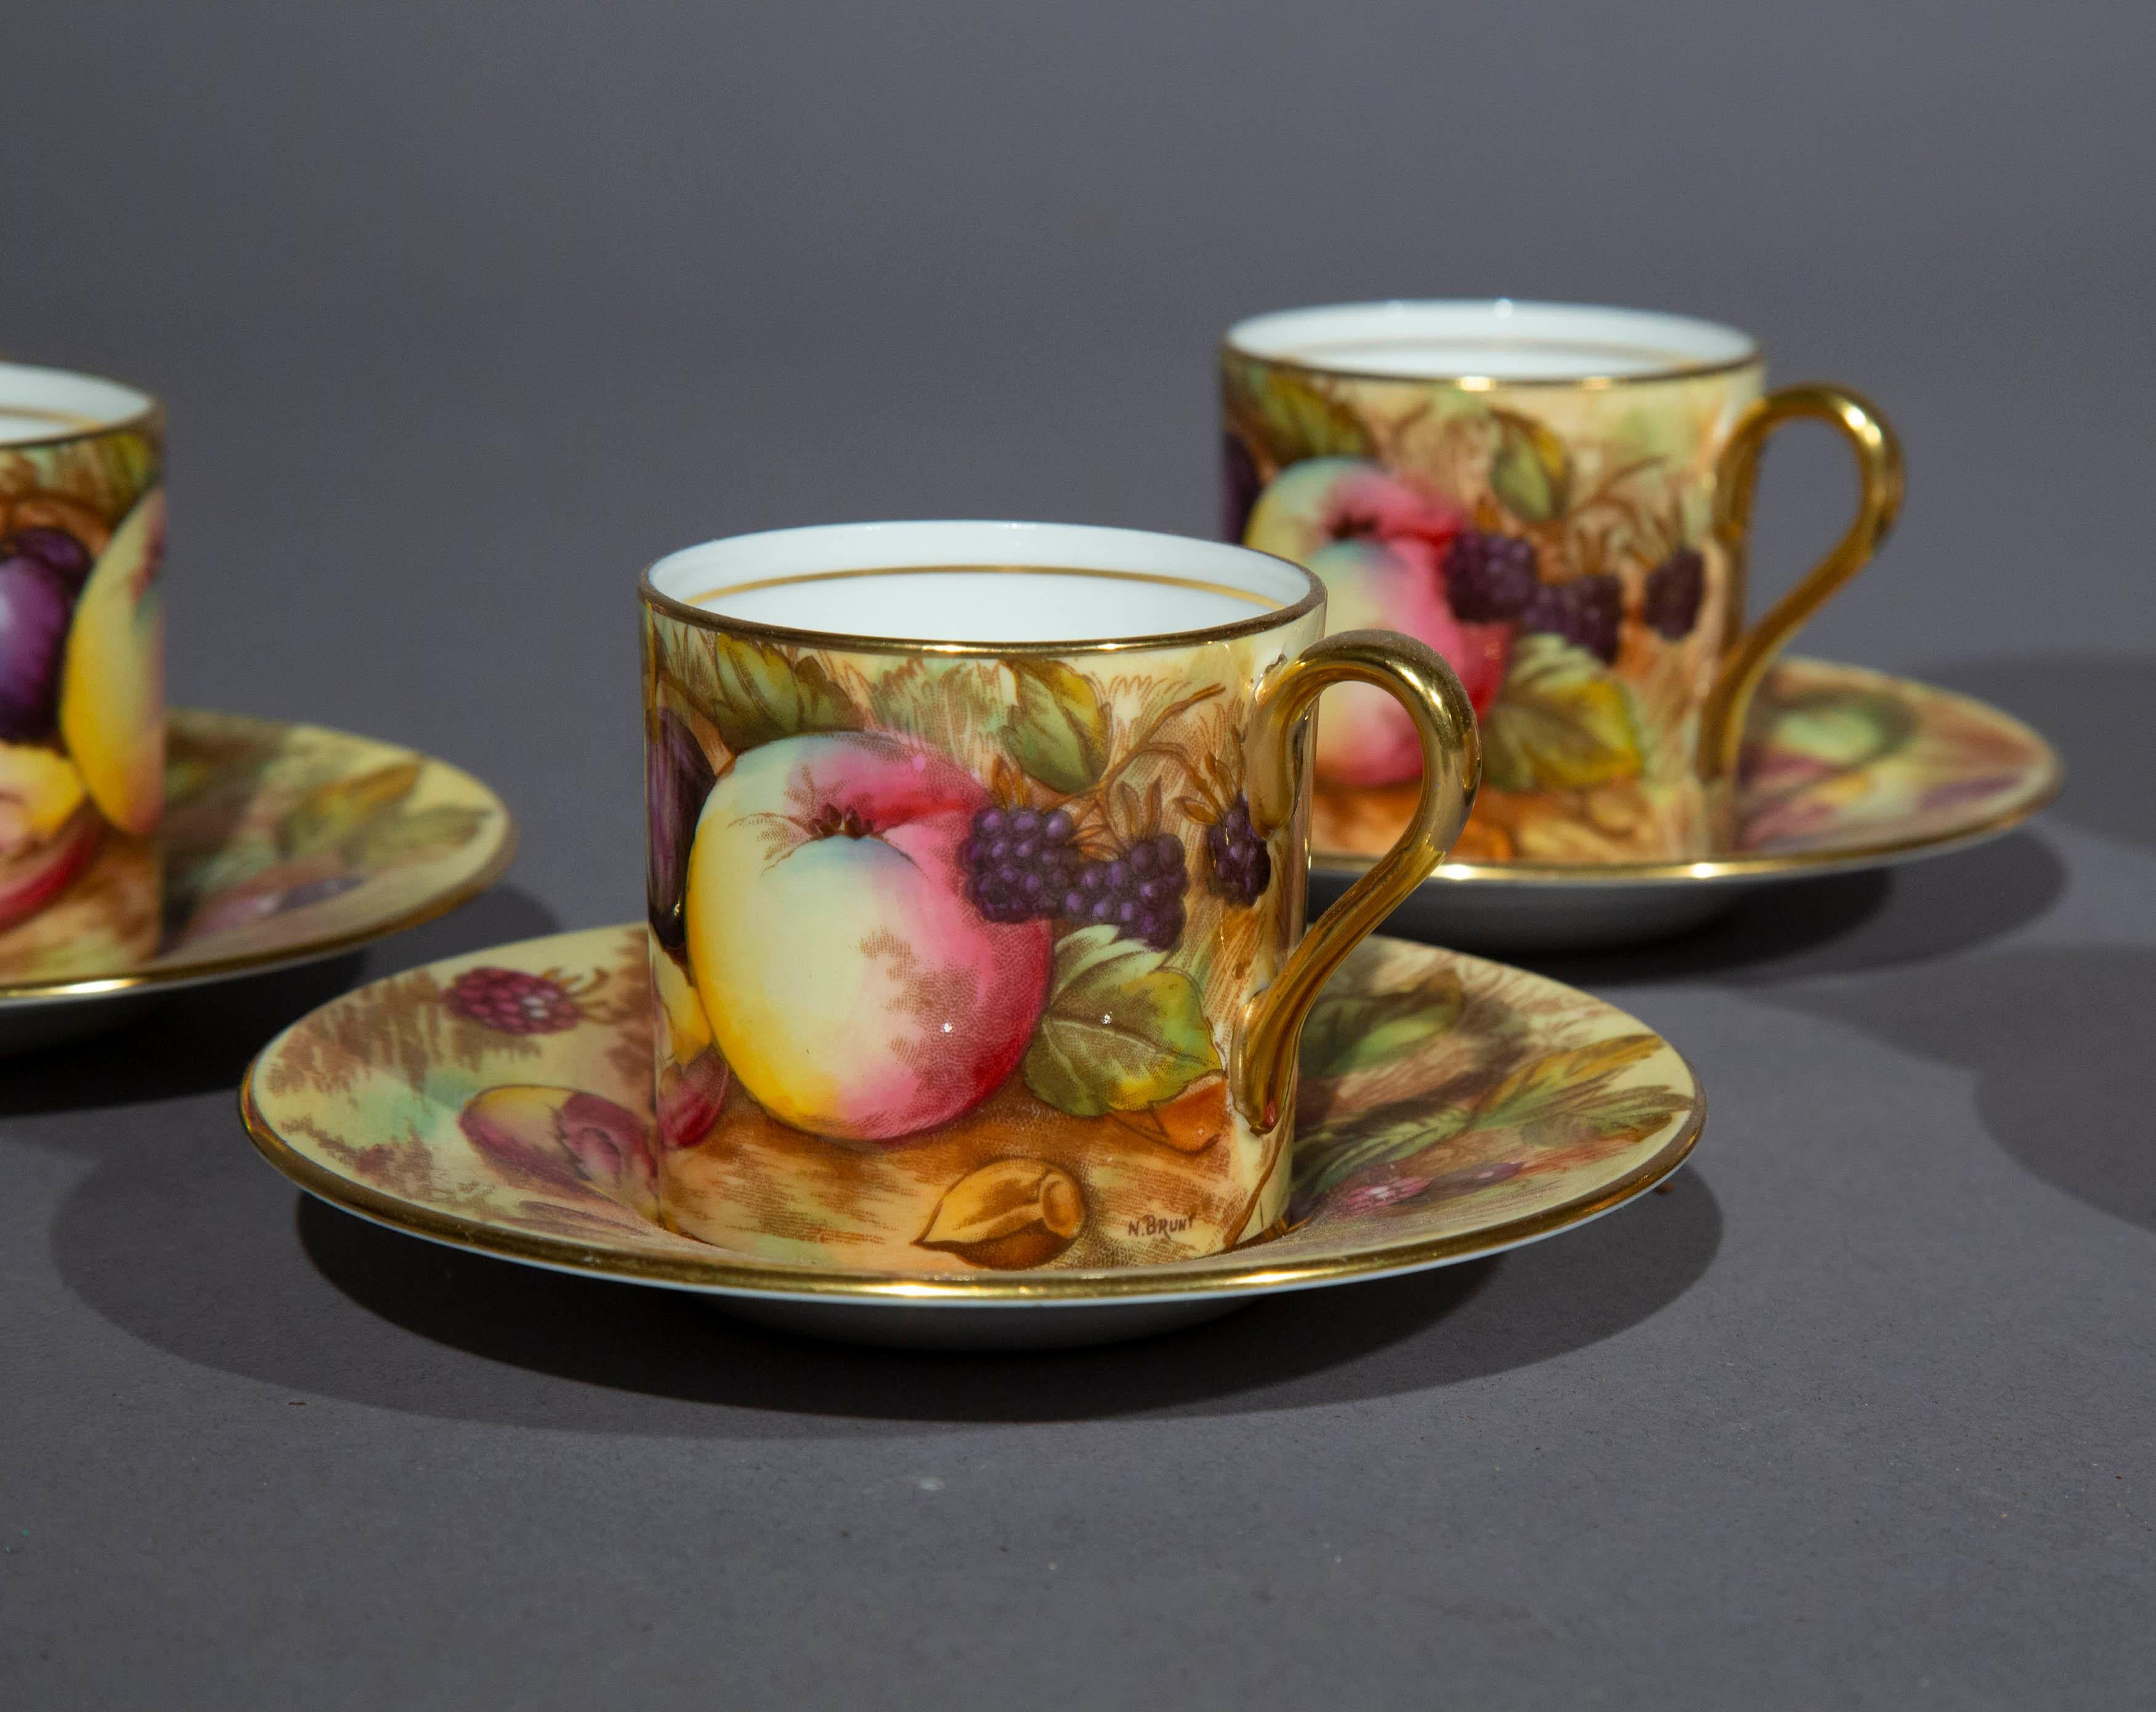 Set of five porcelain coffee cups and saucers, of Fruit Orchard pattern, decorated by Nancy Brunt (active 1935-1975) for Aynsley, England
Circa 1950's

Elegant small coffee cans and matching saucers, of the signature colourful fruit pattern,